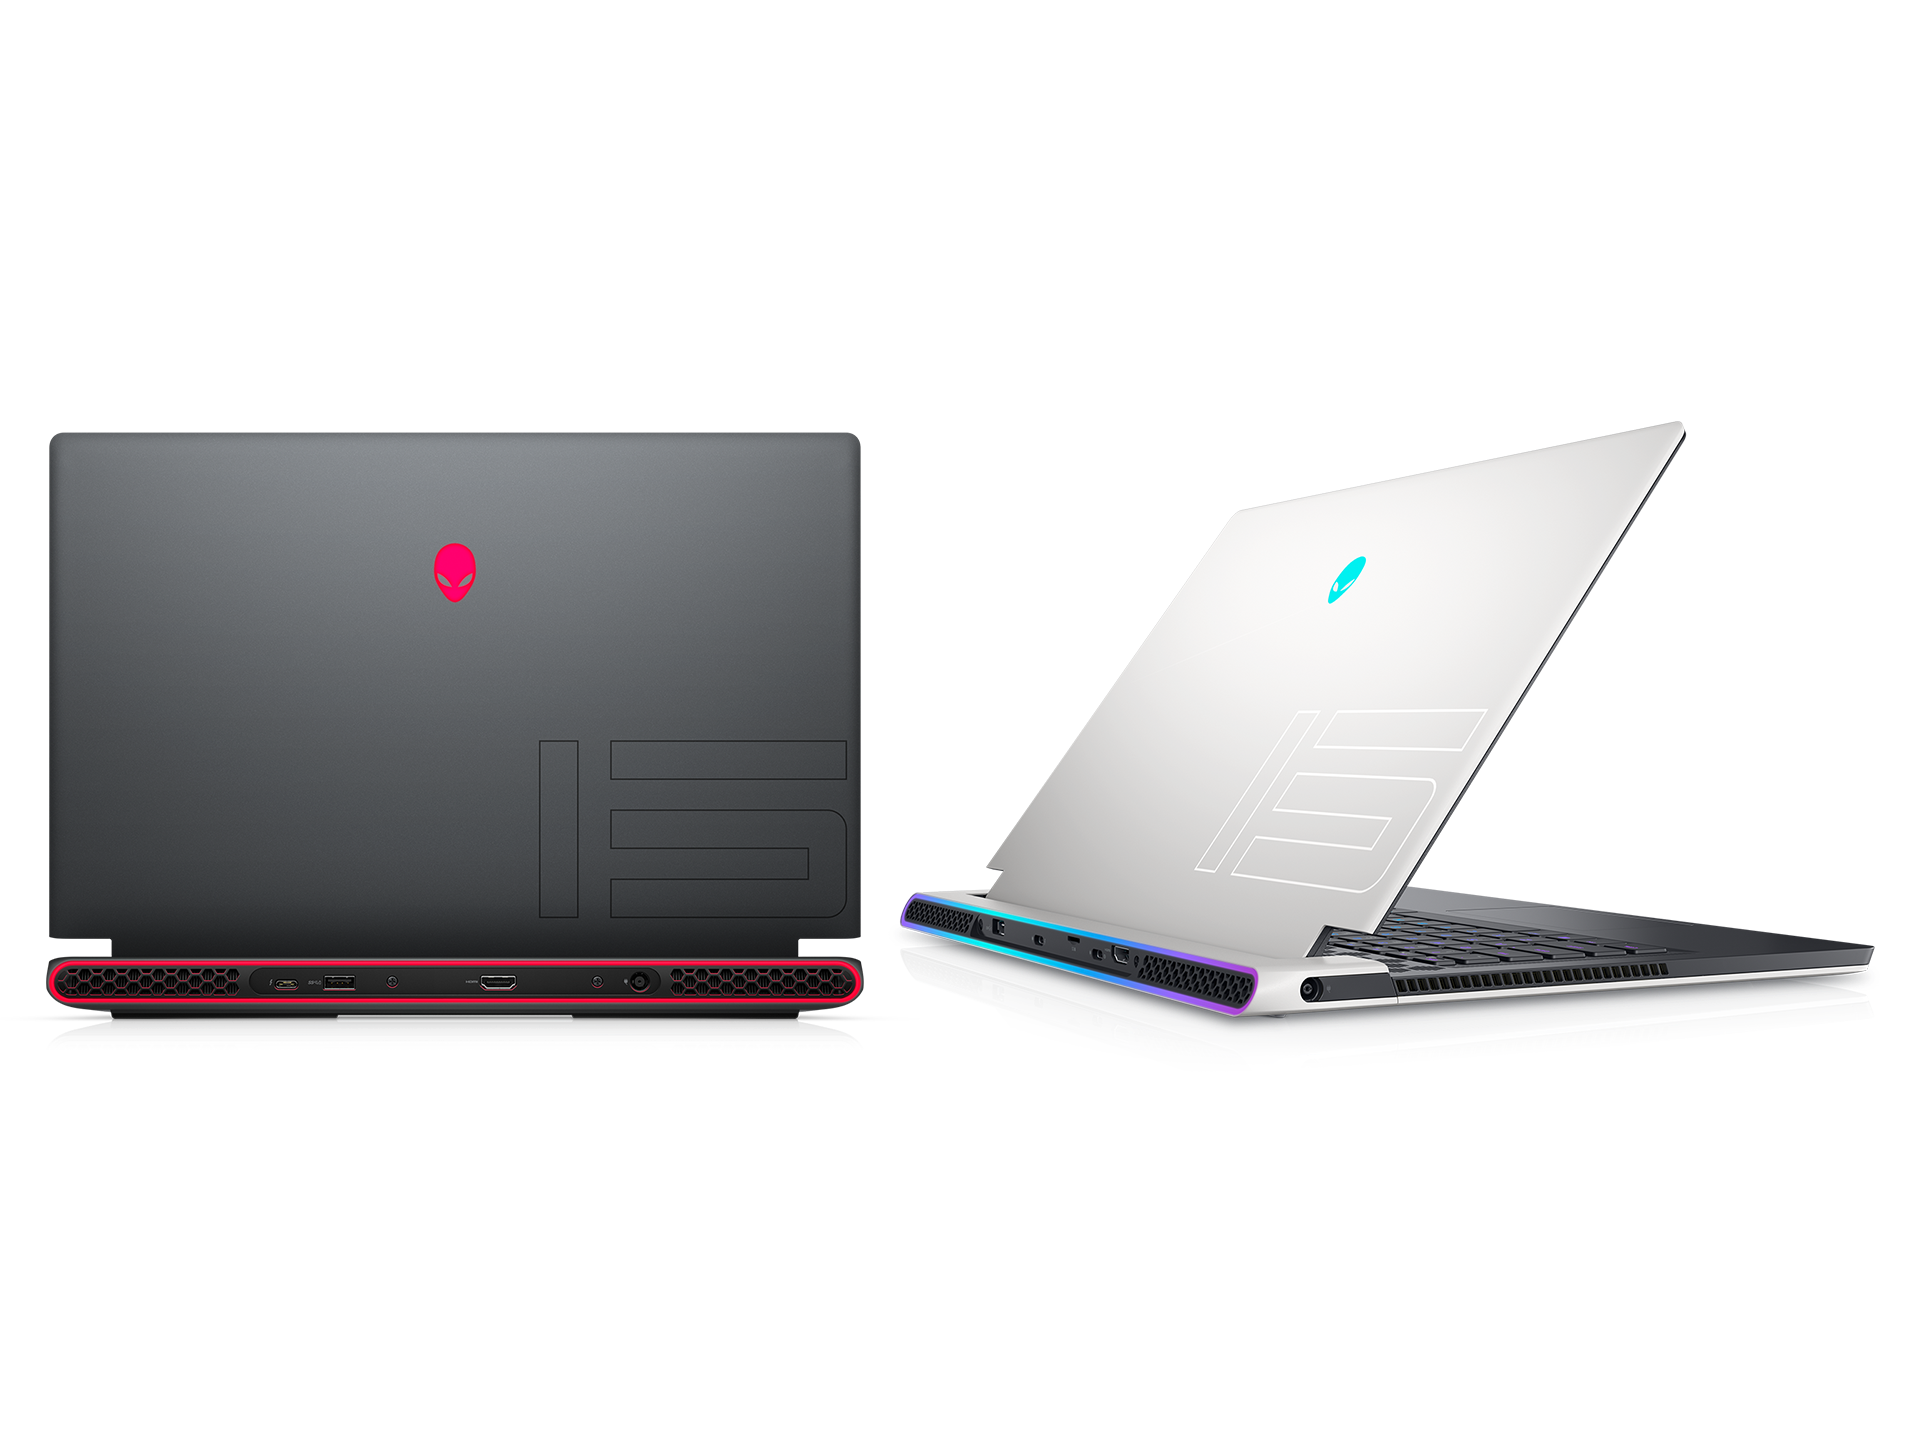 Dell - $100 on select Alienware laptops & desktops for $1499.99 and up